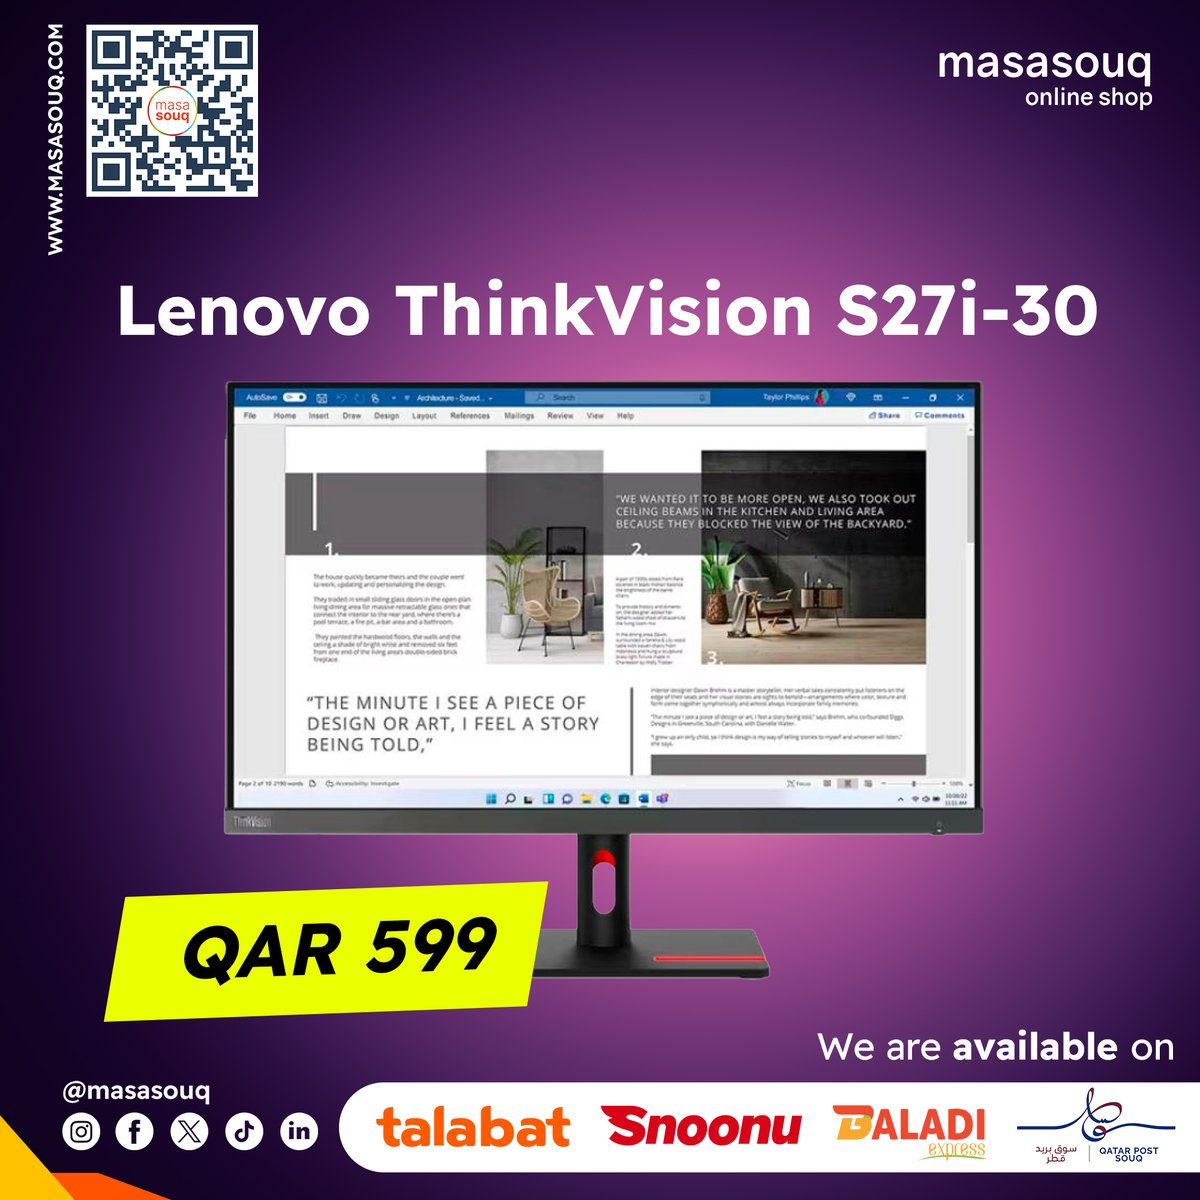 Upgrade your workspace with the sleek Lenovo ThinkVision S27i-30 monitor!  Crystal-clear visuals and a slim design for maximum productivity. Get yours today for only QAR599 👉 masasouq.com/lenovo-thinkvi…  #Lenovo #ThinkVision #productivity #workfromhome #monitor #Masasouq💻